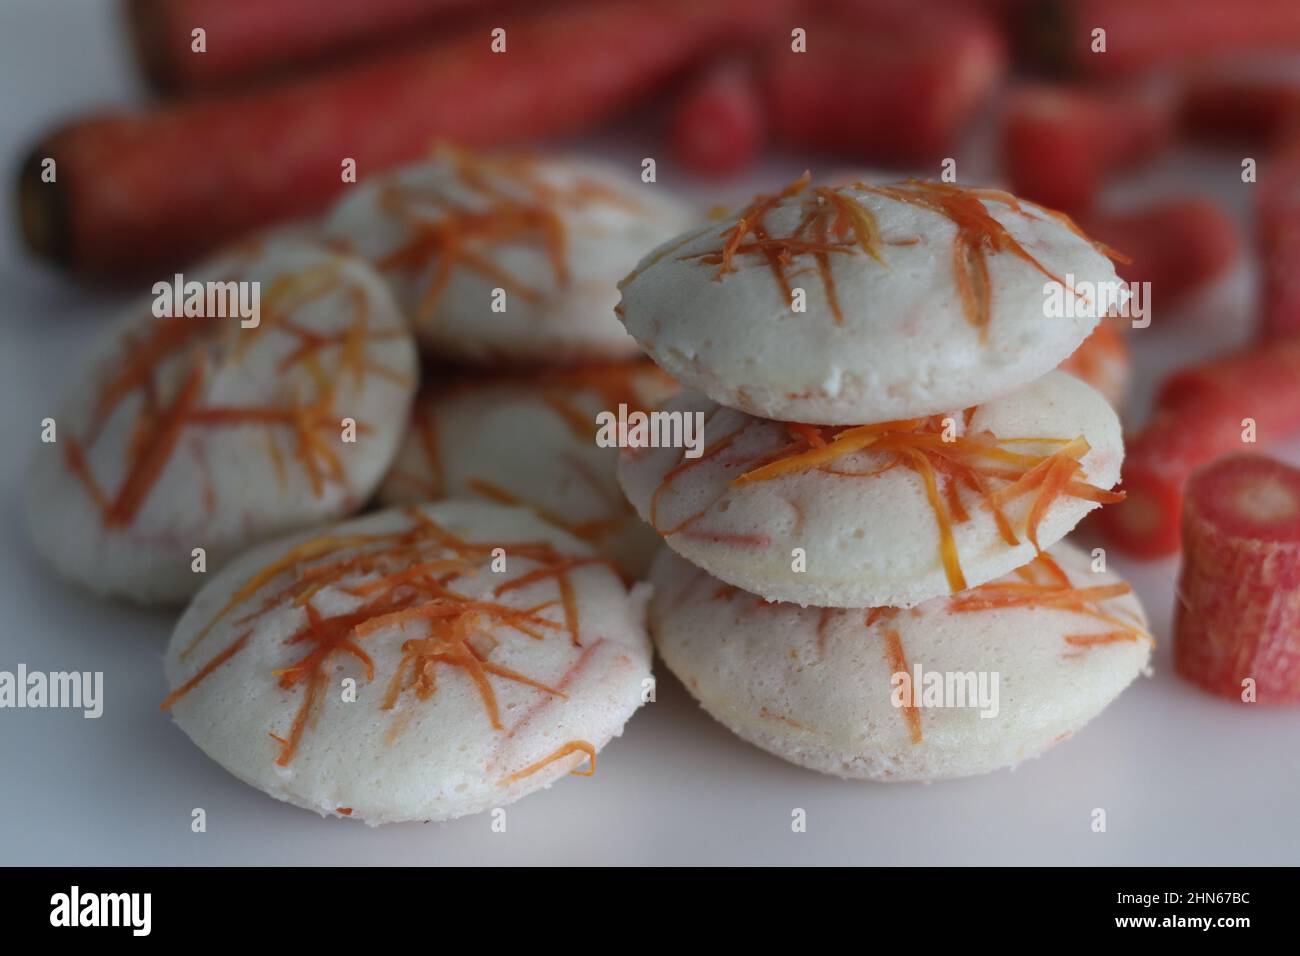 Carrot Idly. Steamed rice cakes with grated carrots. Shot on white background Stock Photo